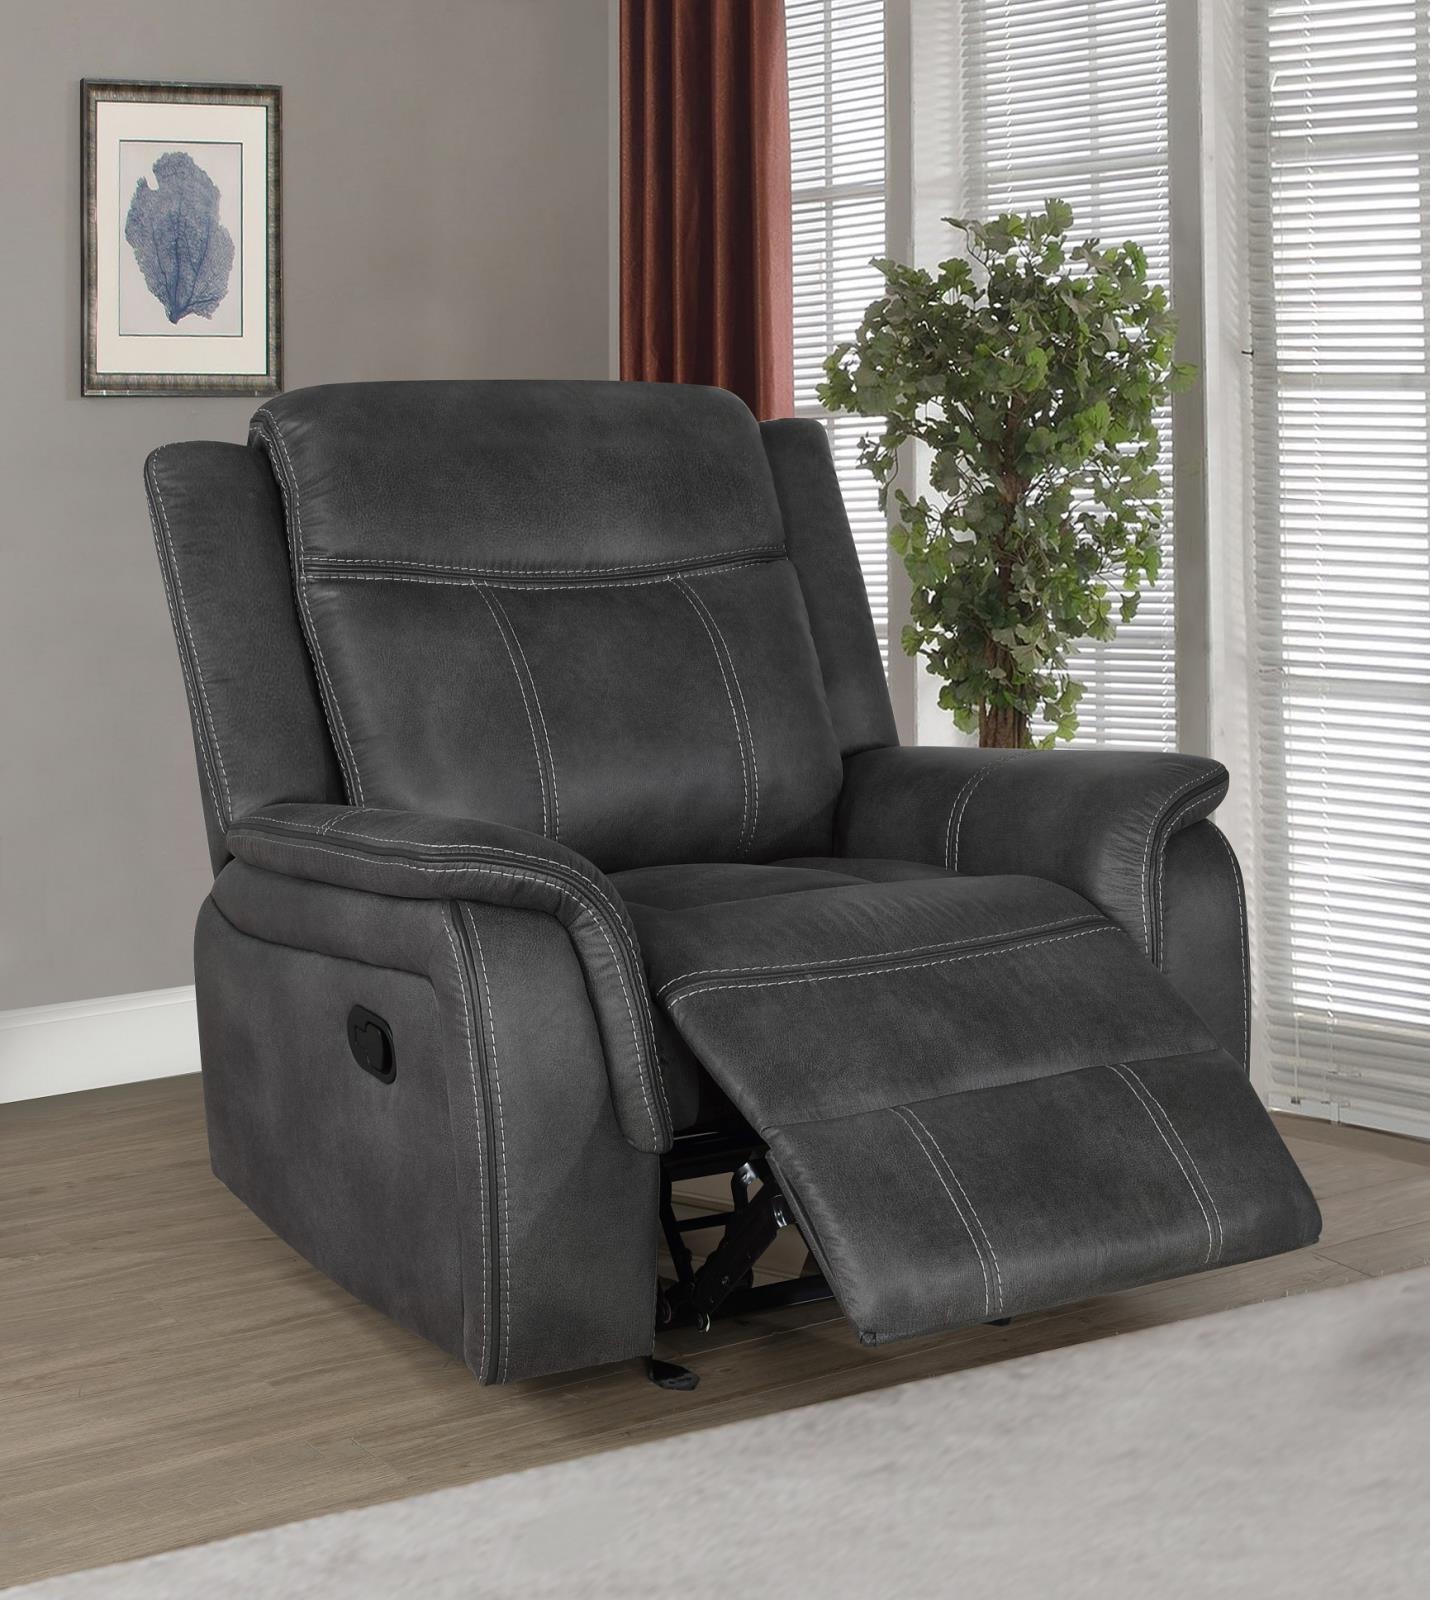 Lawrence Upholstered Tufted Back Glider Recliner - What A Room